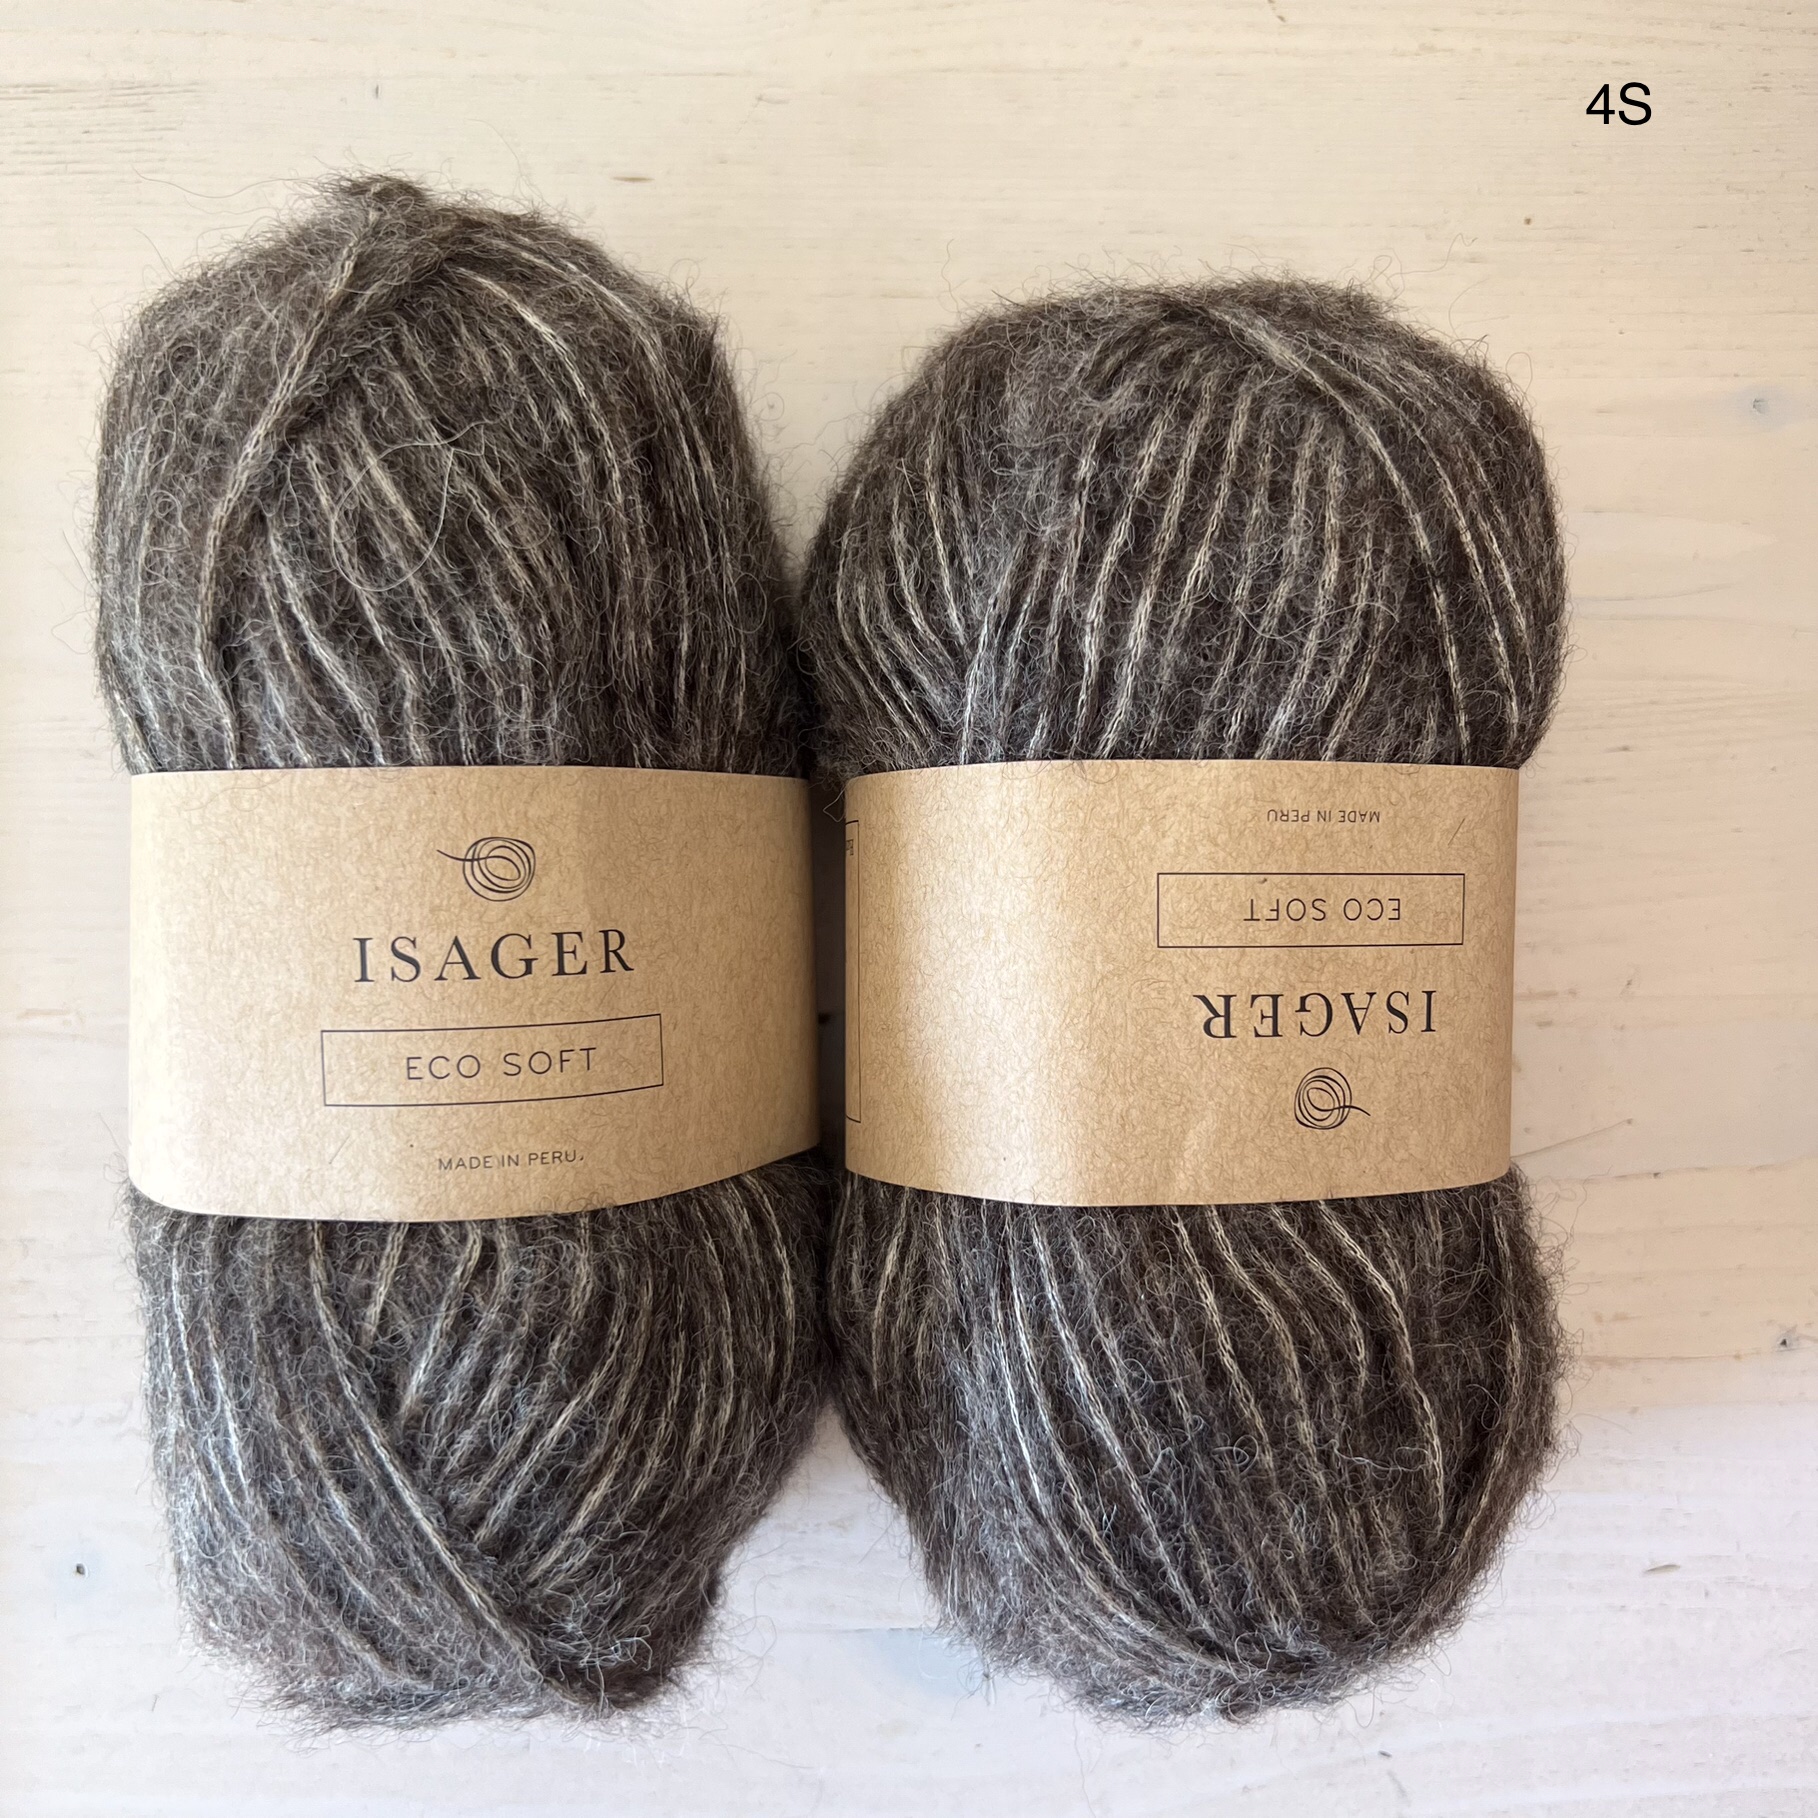 Isager Eco Soft